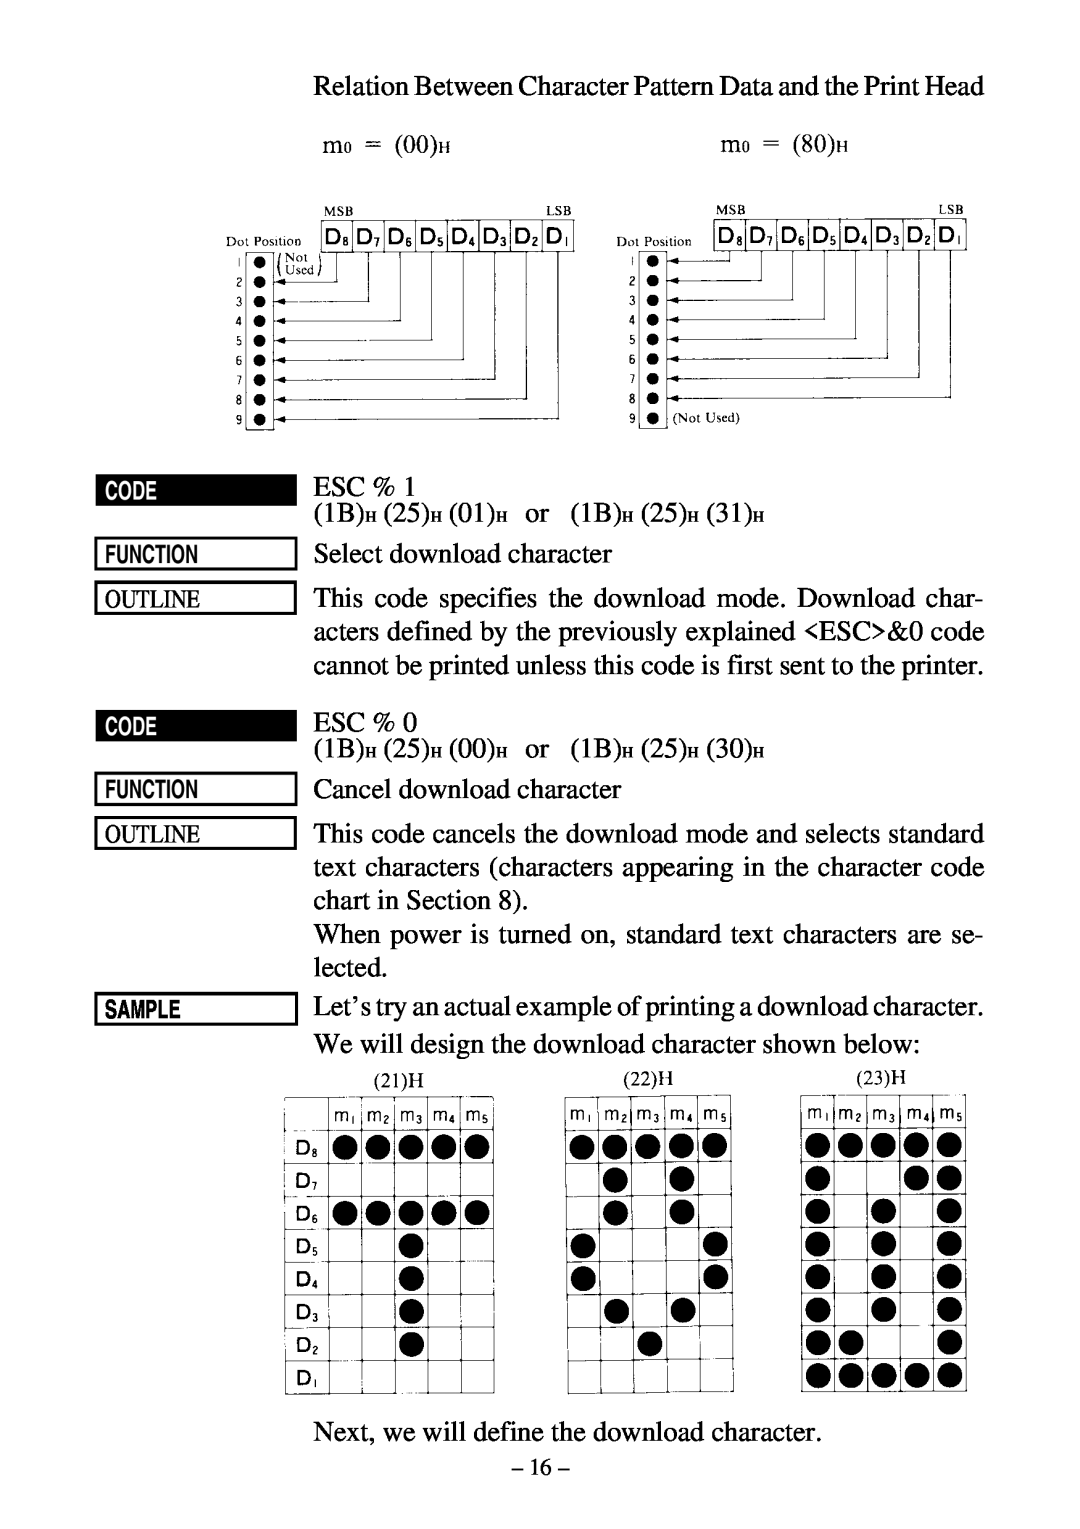 Star Micronics DP8340 user manual Relation Between Character Pattern Data and the Print Head ESC % 